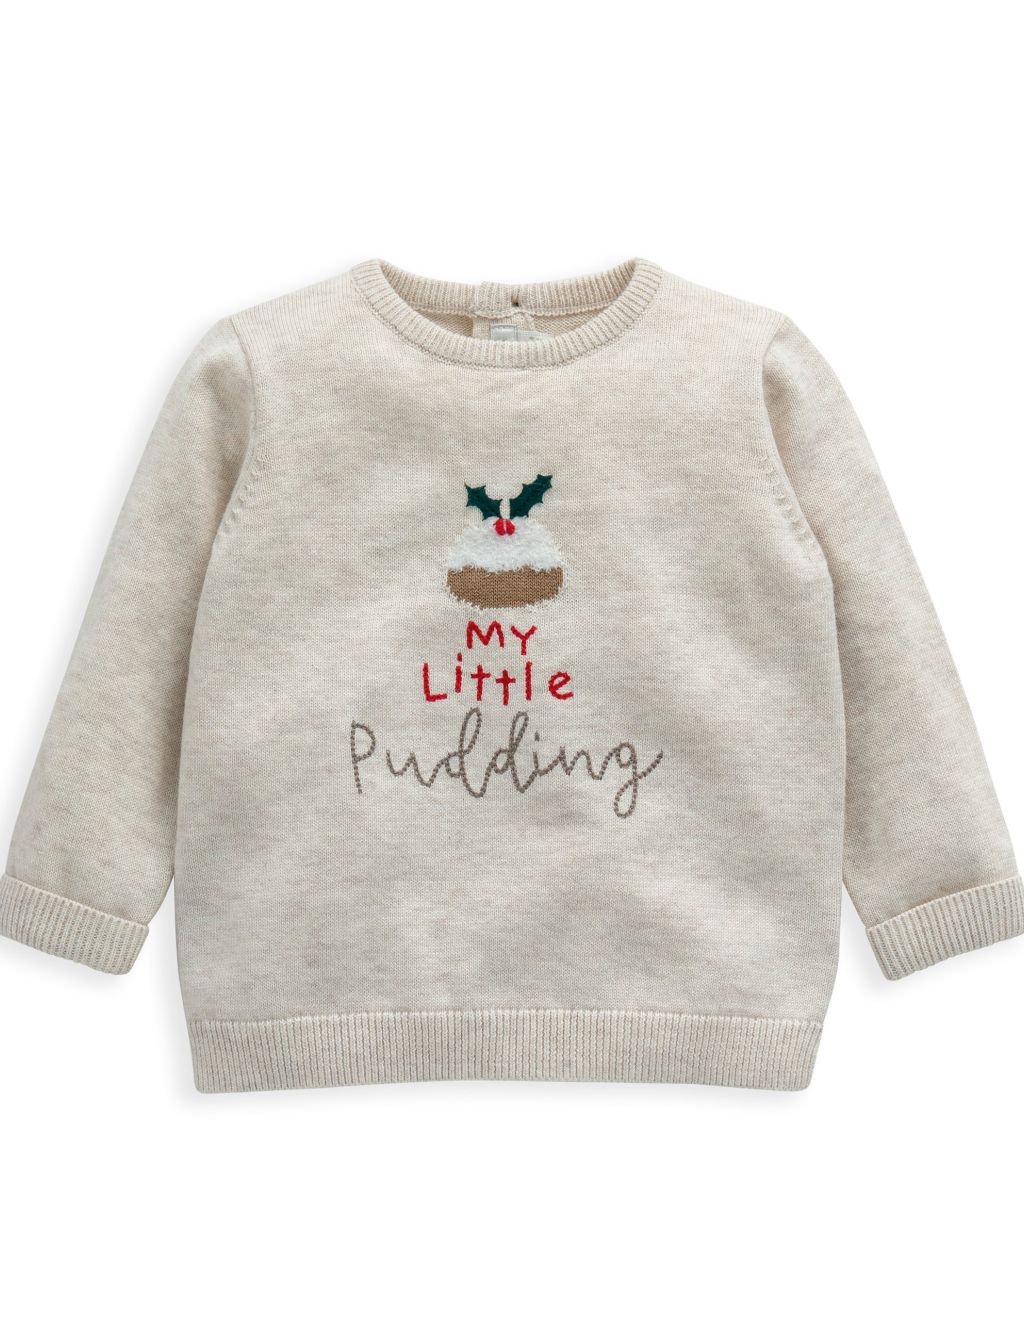 My Little Pudding Christmas Jumper (0-3 yrs) image 2